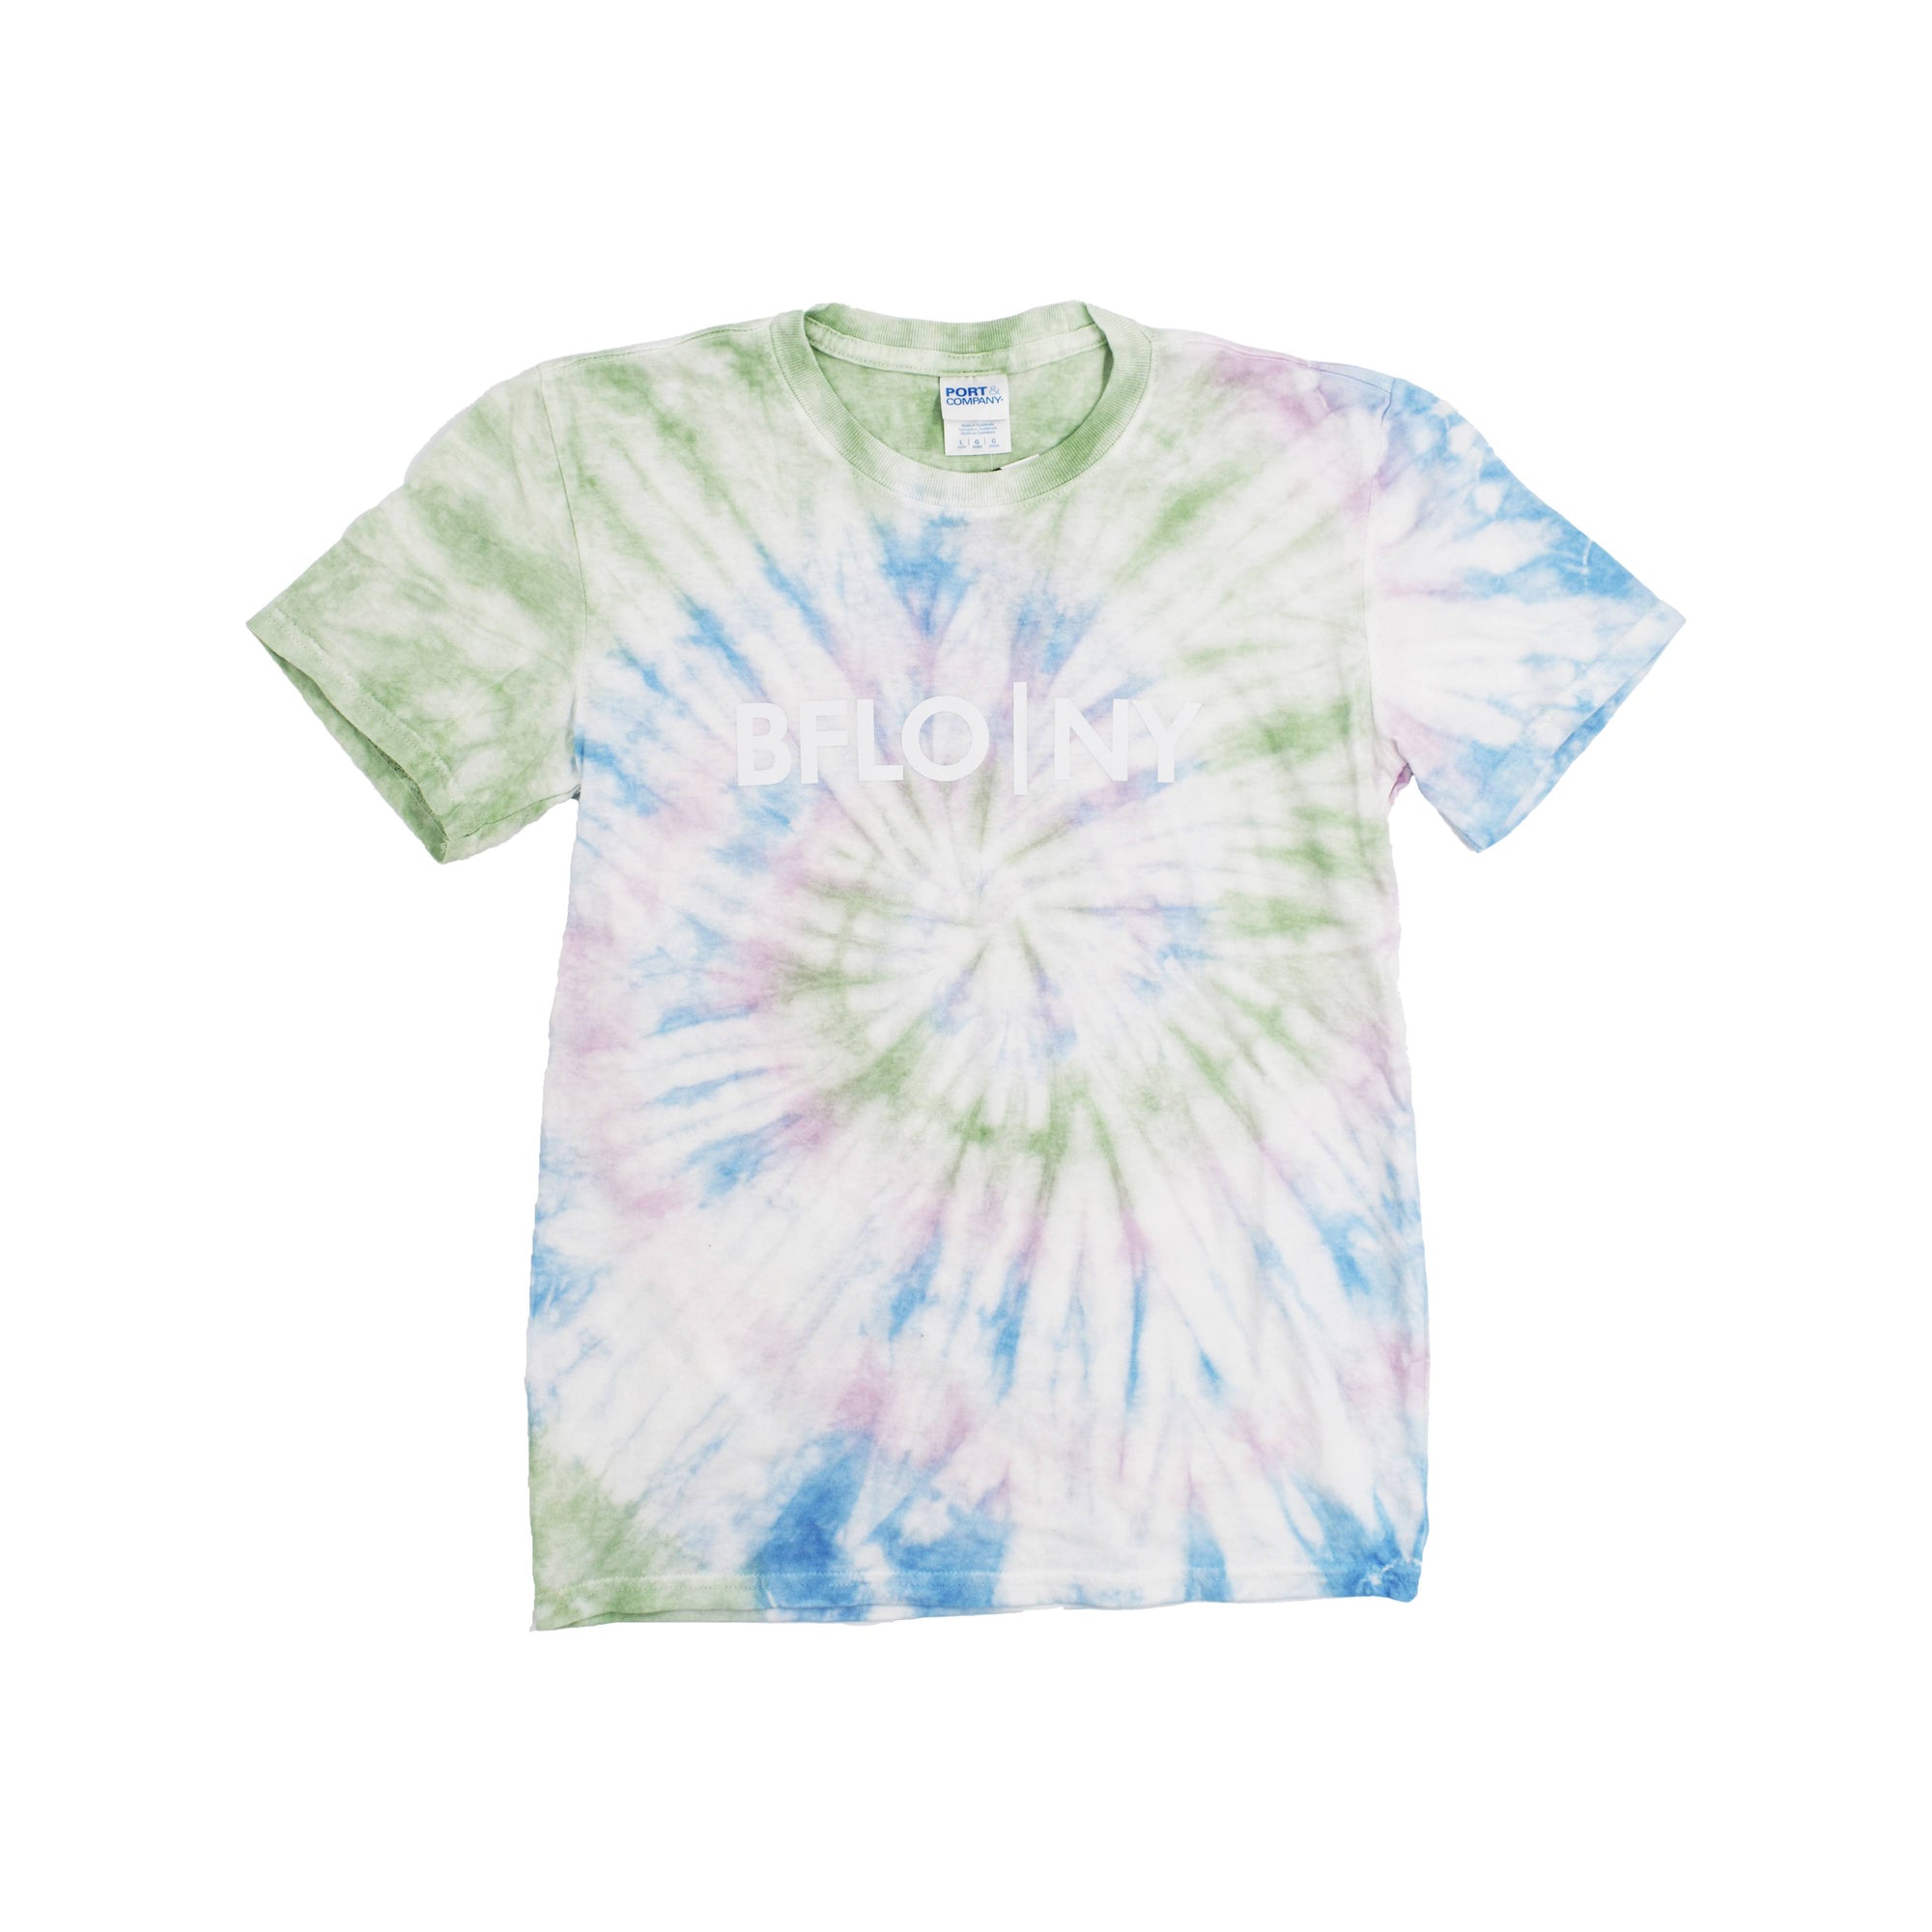 Buffalo BFLO NY youth short sleeve shirt with white green blue and red tie dye